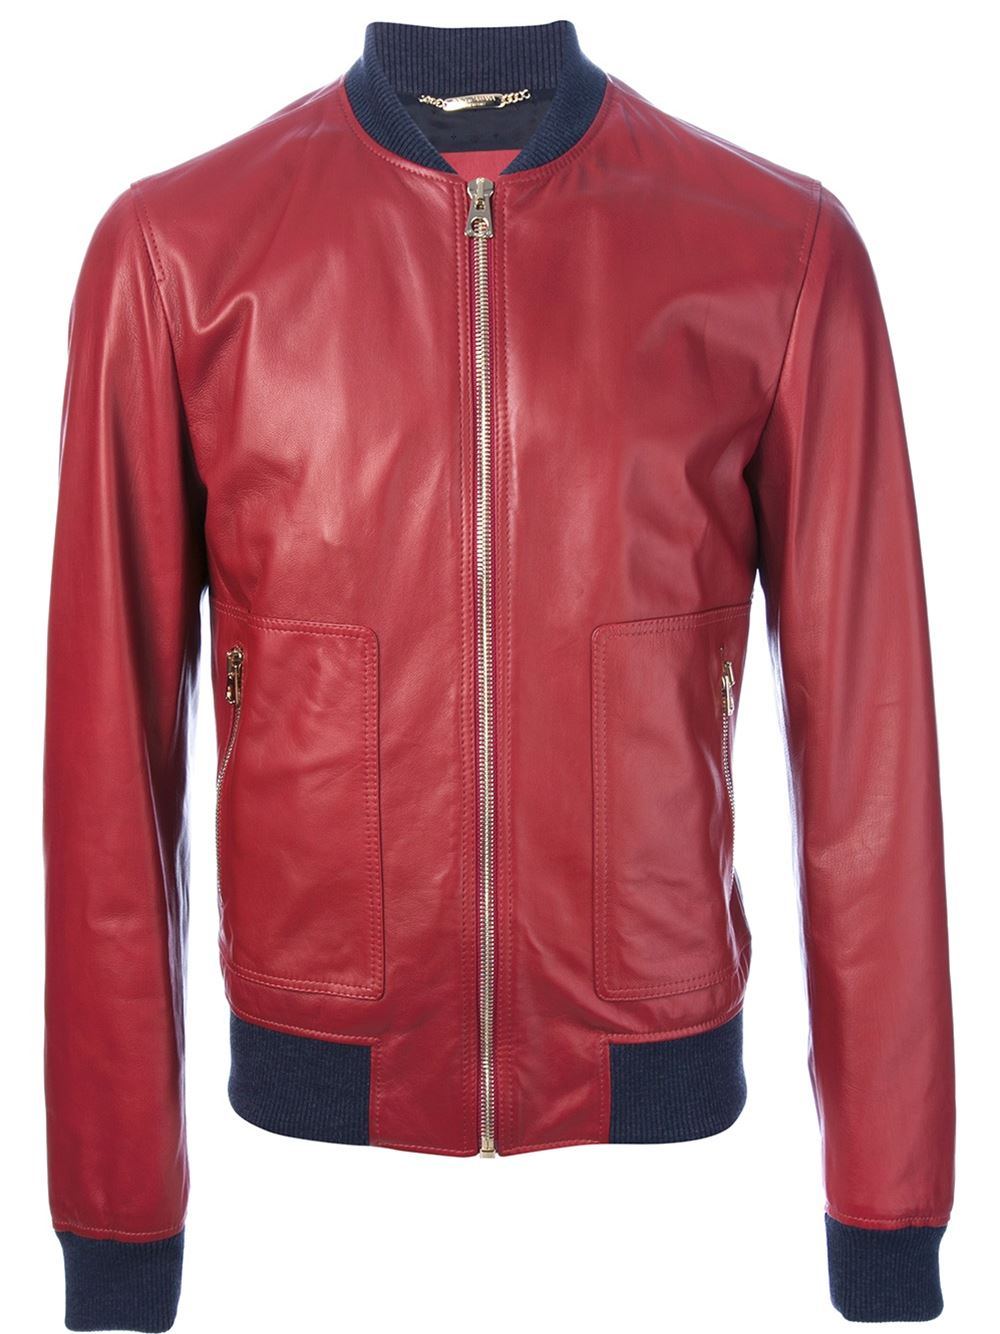 Lyst - Dolce & Gabbana Classic Bomber Jacket in Red for Men